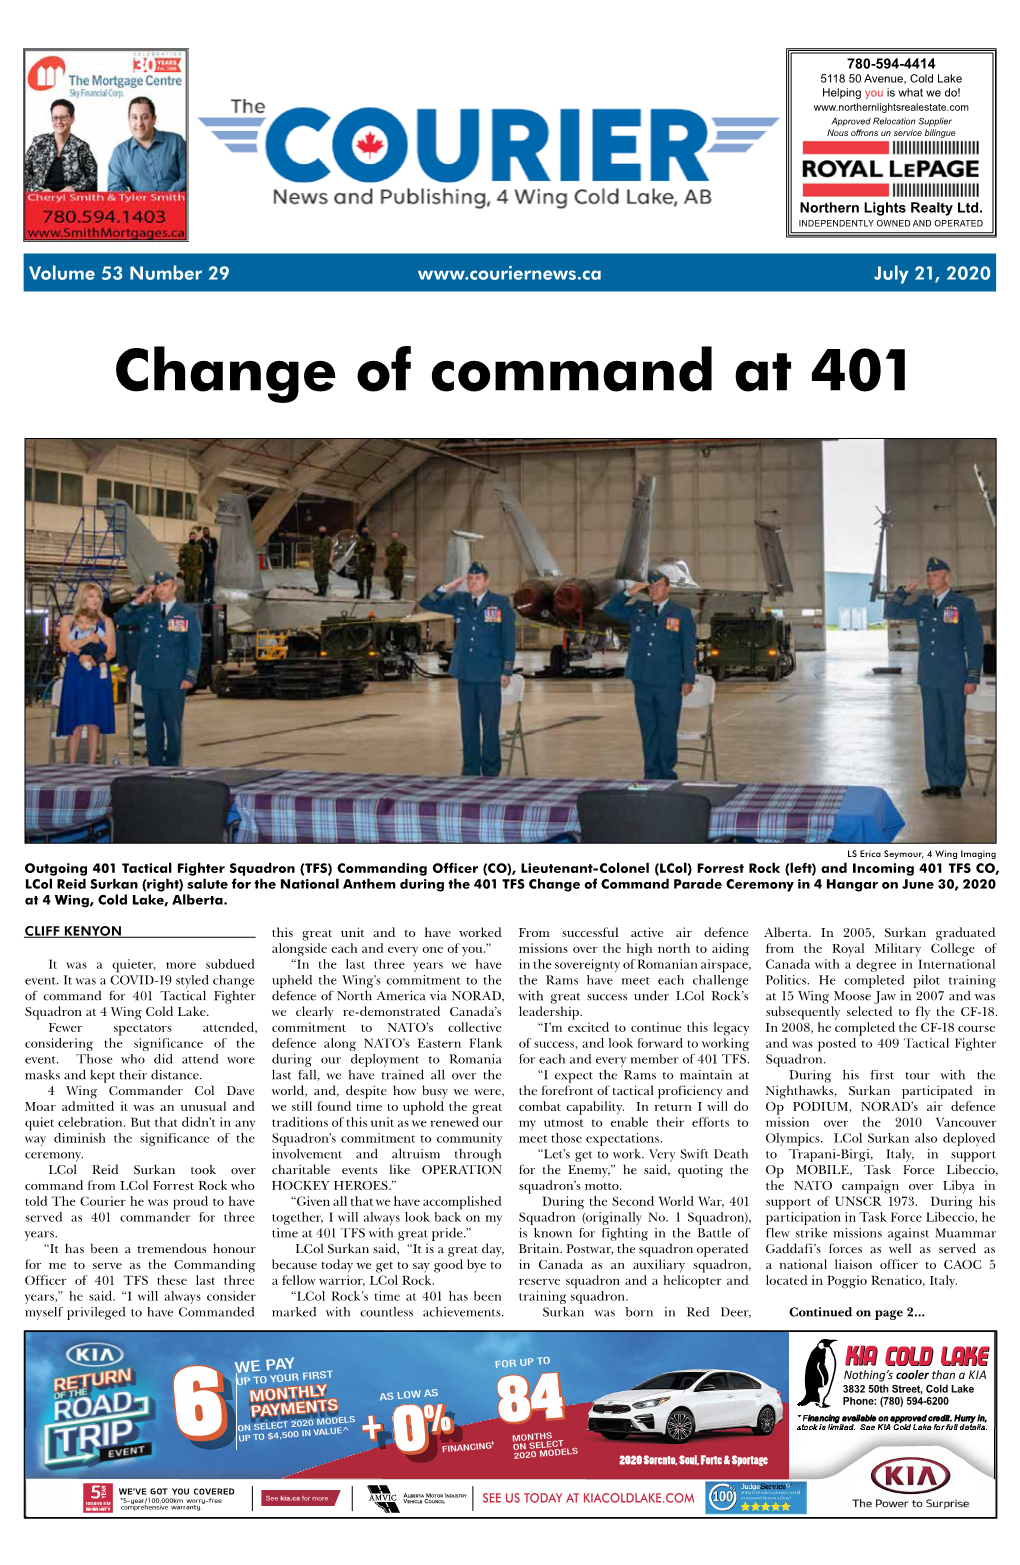 Change of Command at 401